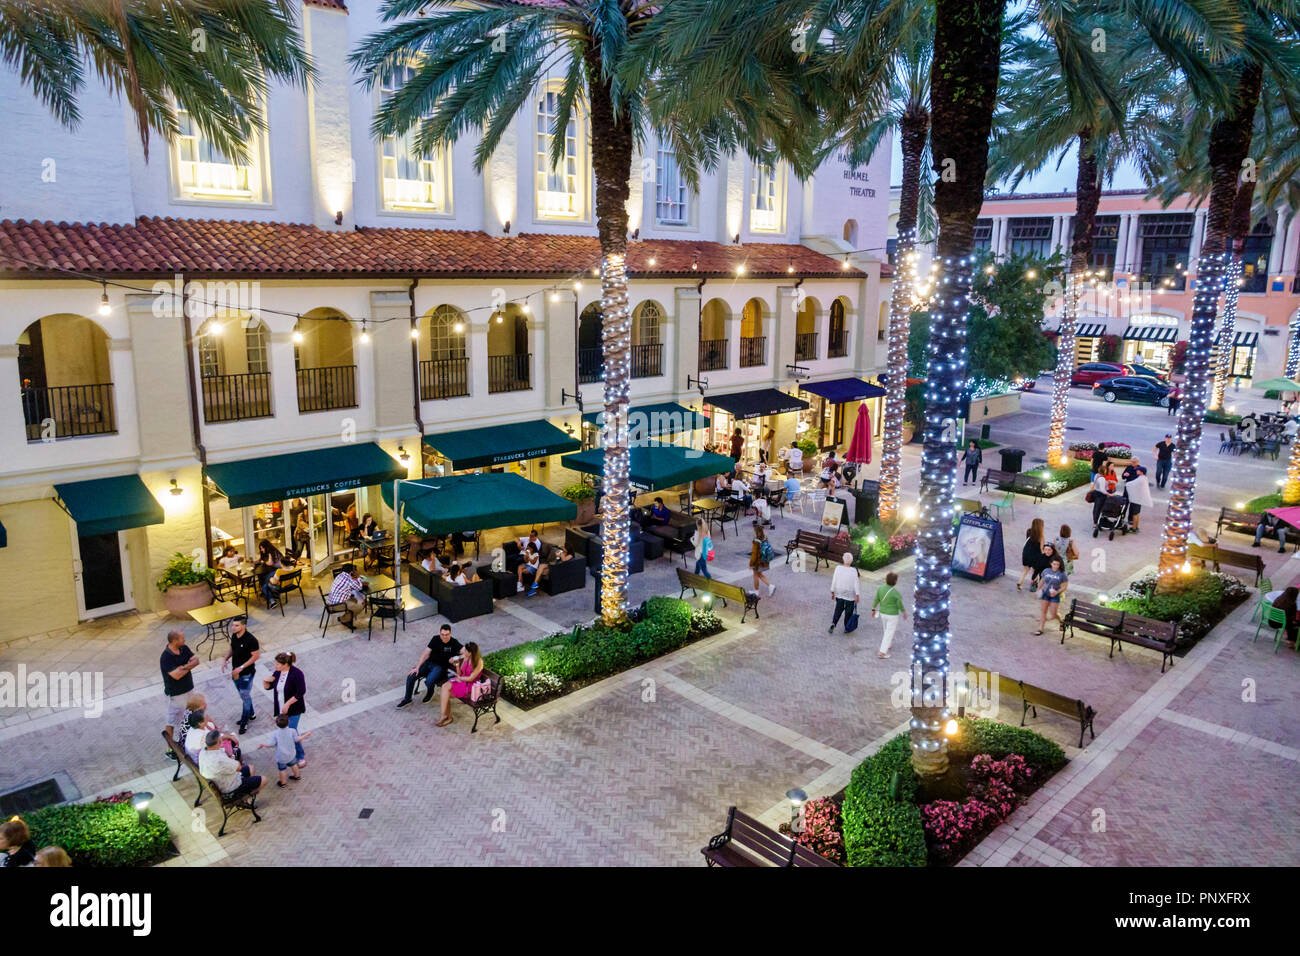 West Palm Beach Florida,The Square formerly CityPlace,shopping shopper shoppers shop shops market markets marketplace buying selling,retail store stores business business Stock Photo